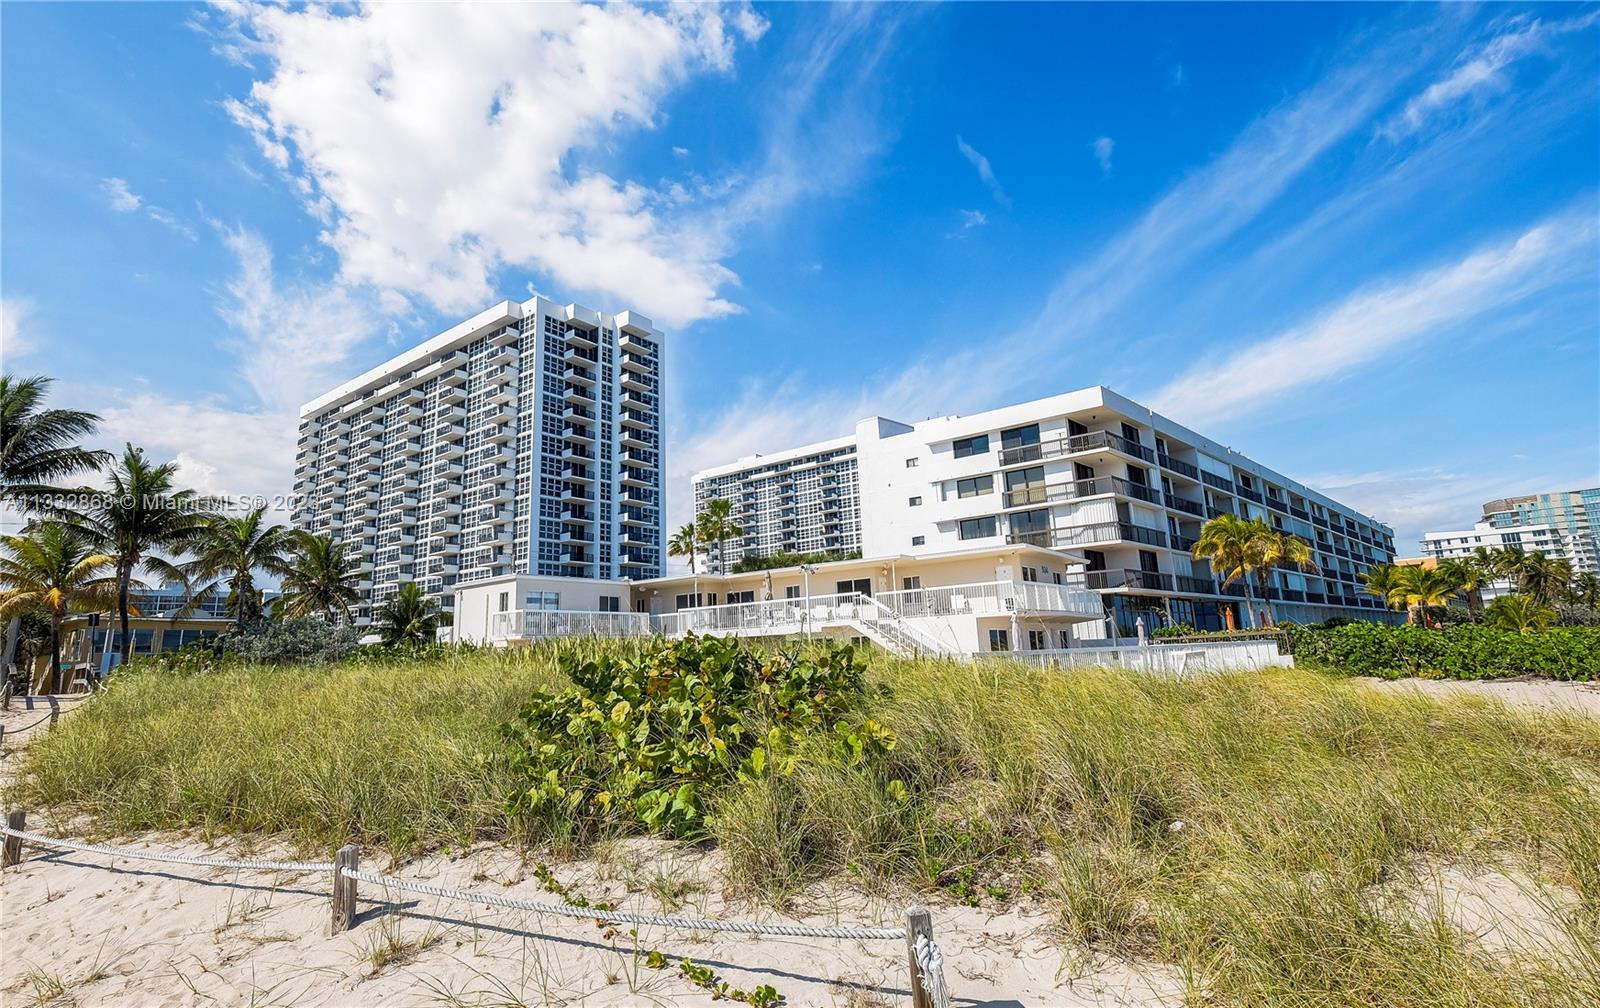 Stunning condo-townhouse just steps away from the beach. This corner unit offers the best of both wo